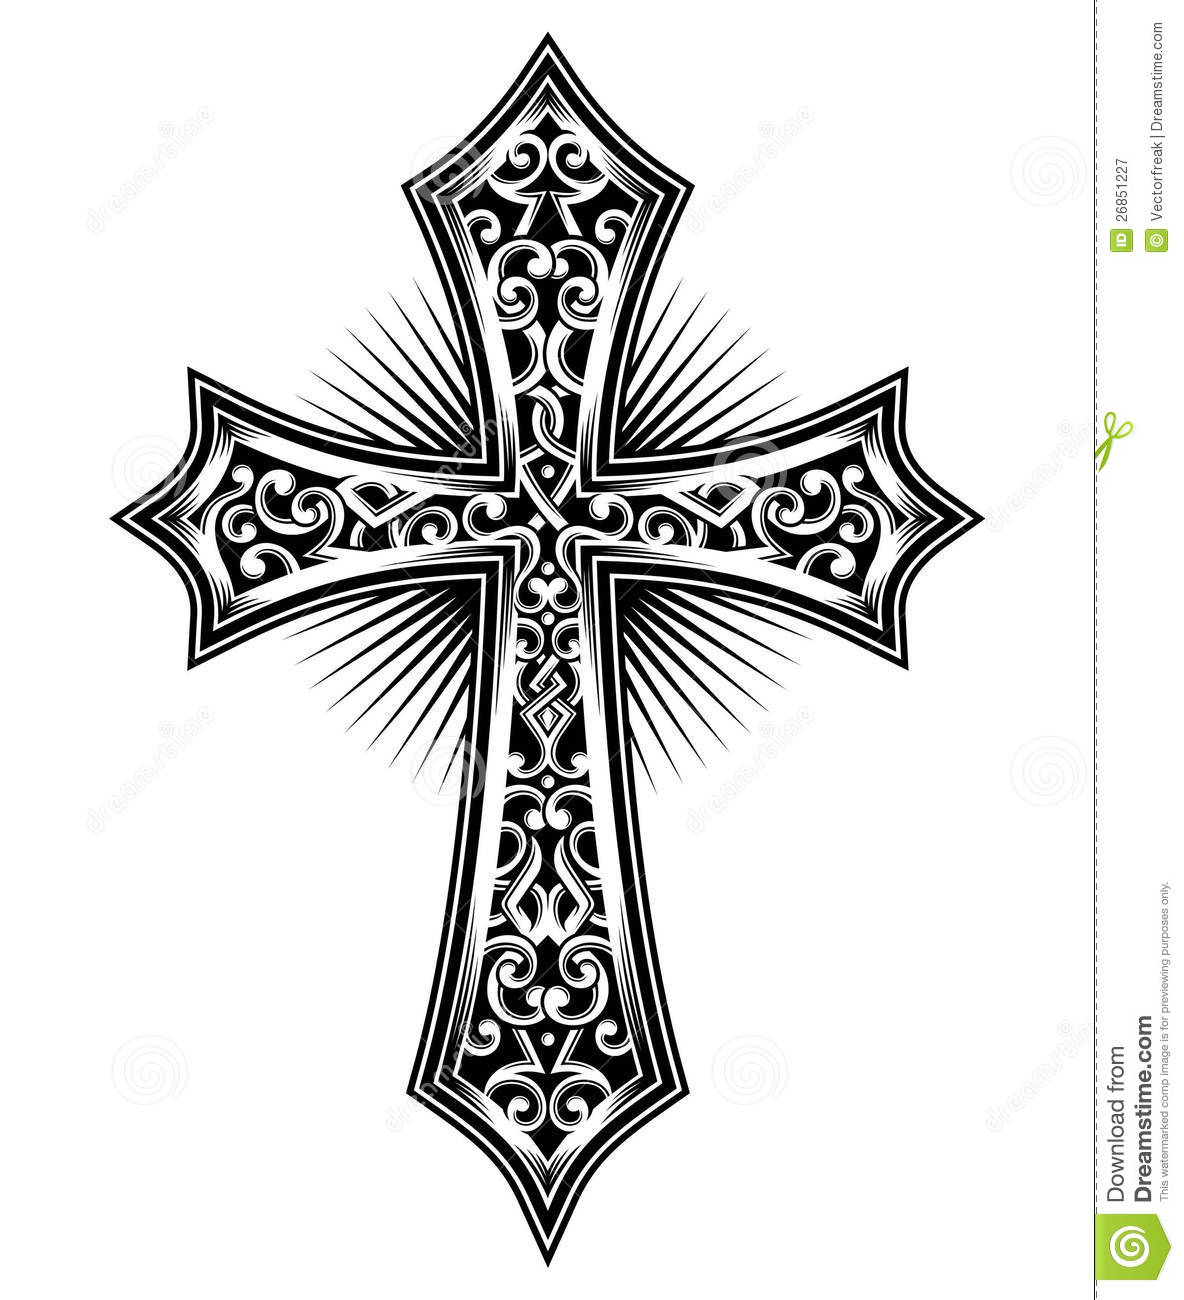 Vector Illustration Of Carved Cross Image Suitable For Printing On A